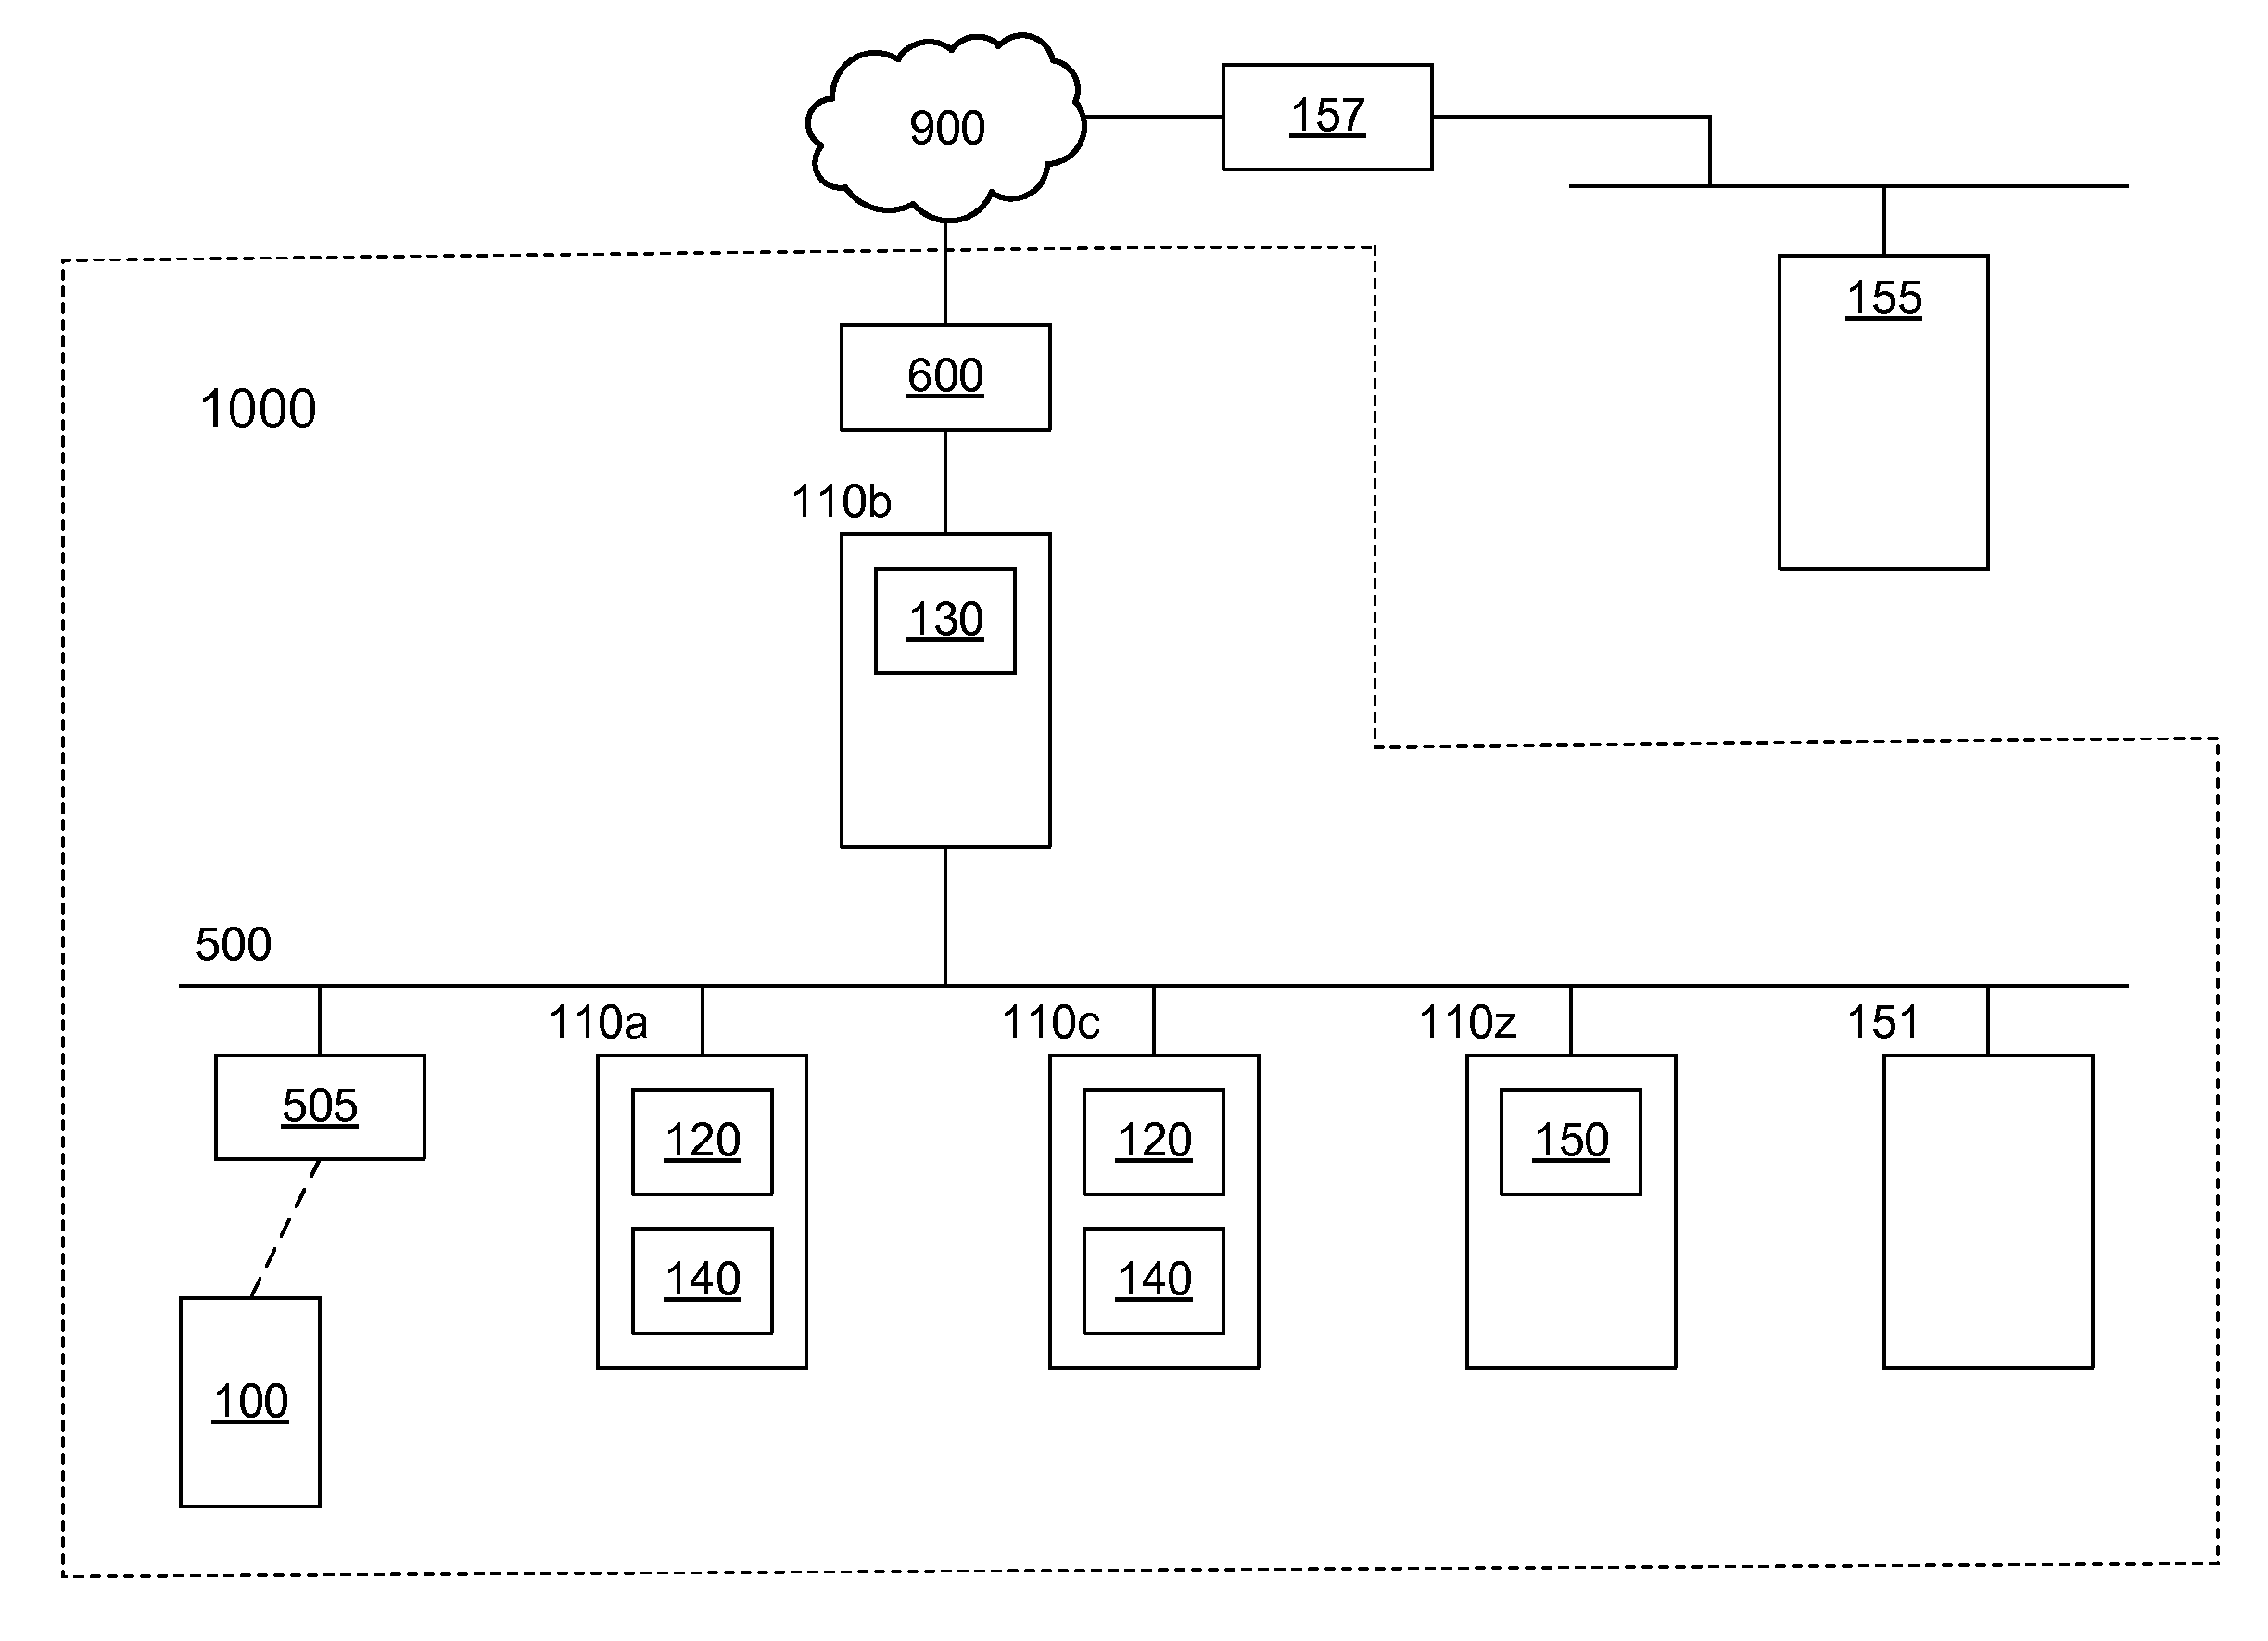 Pre-paid usage system for encoded information reading terminals